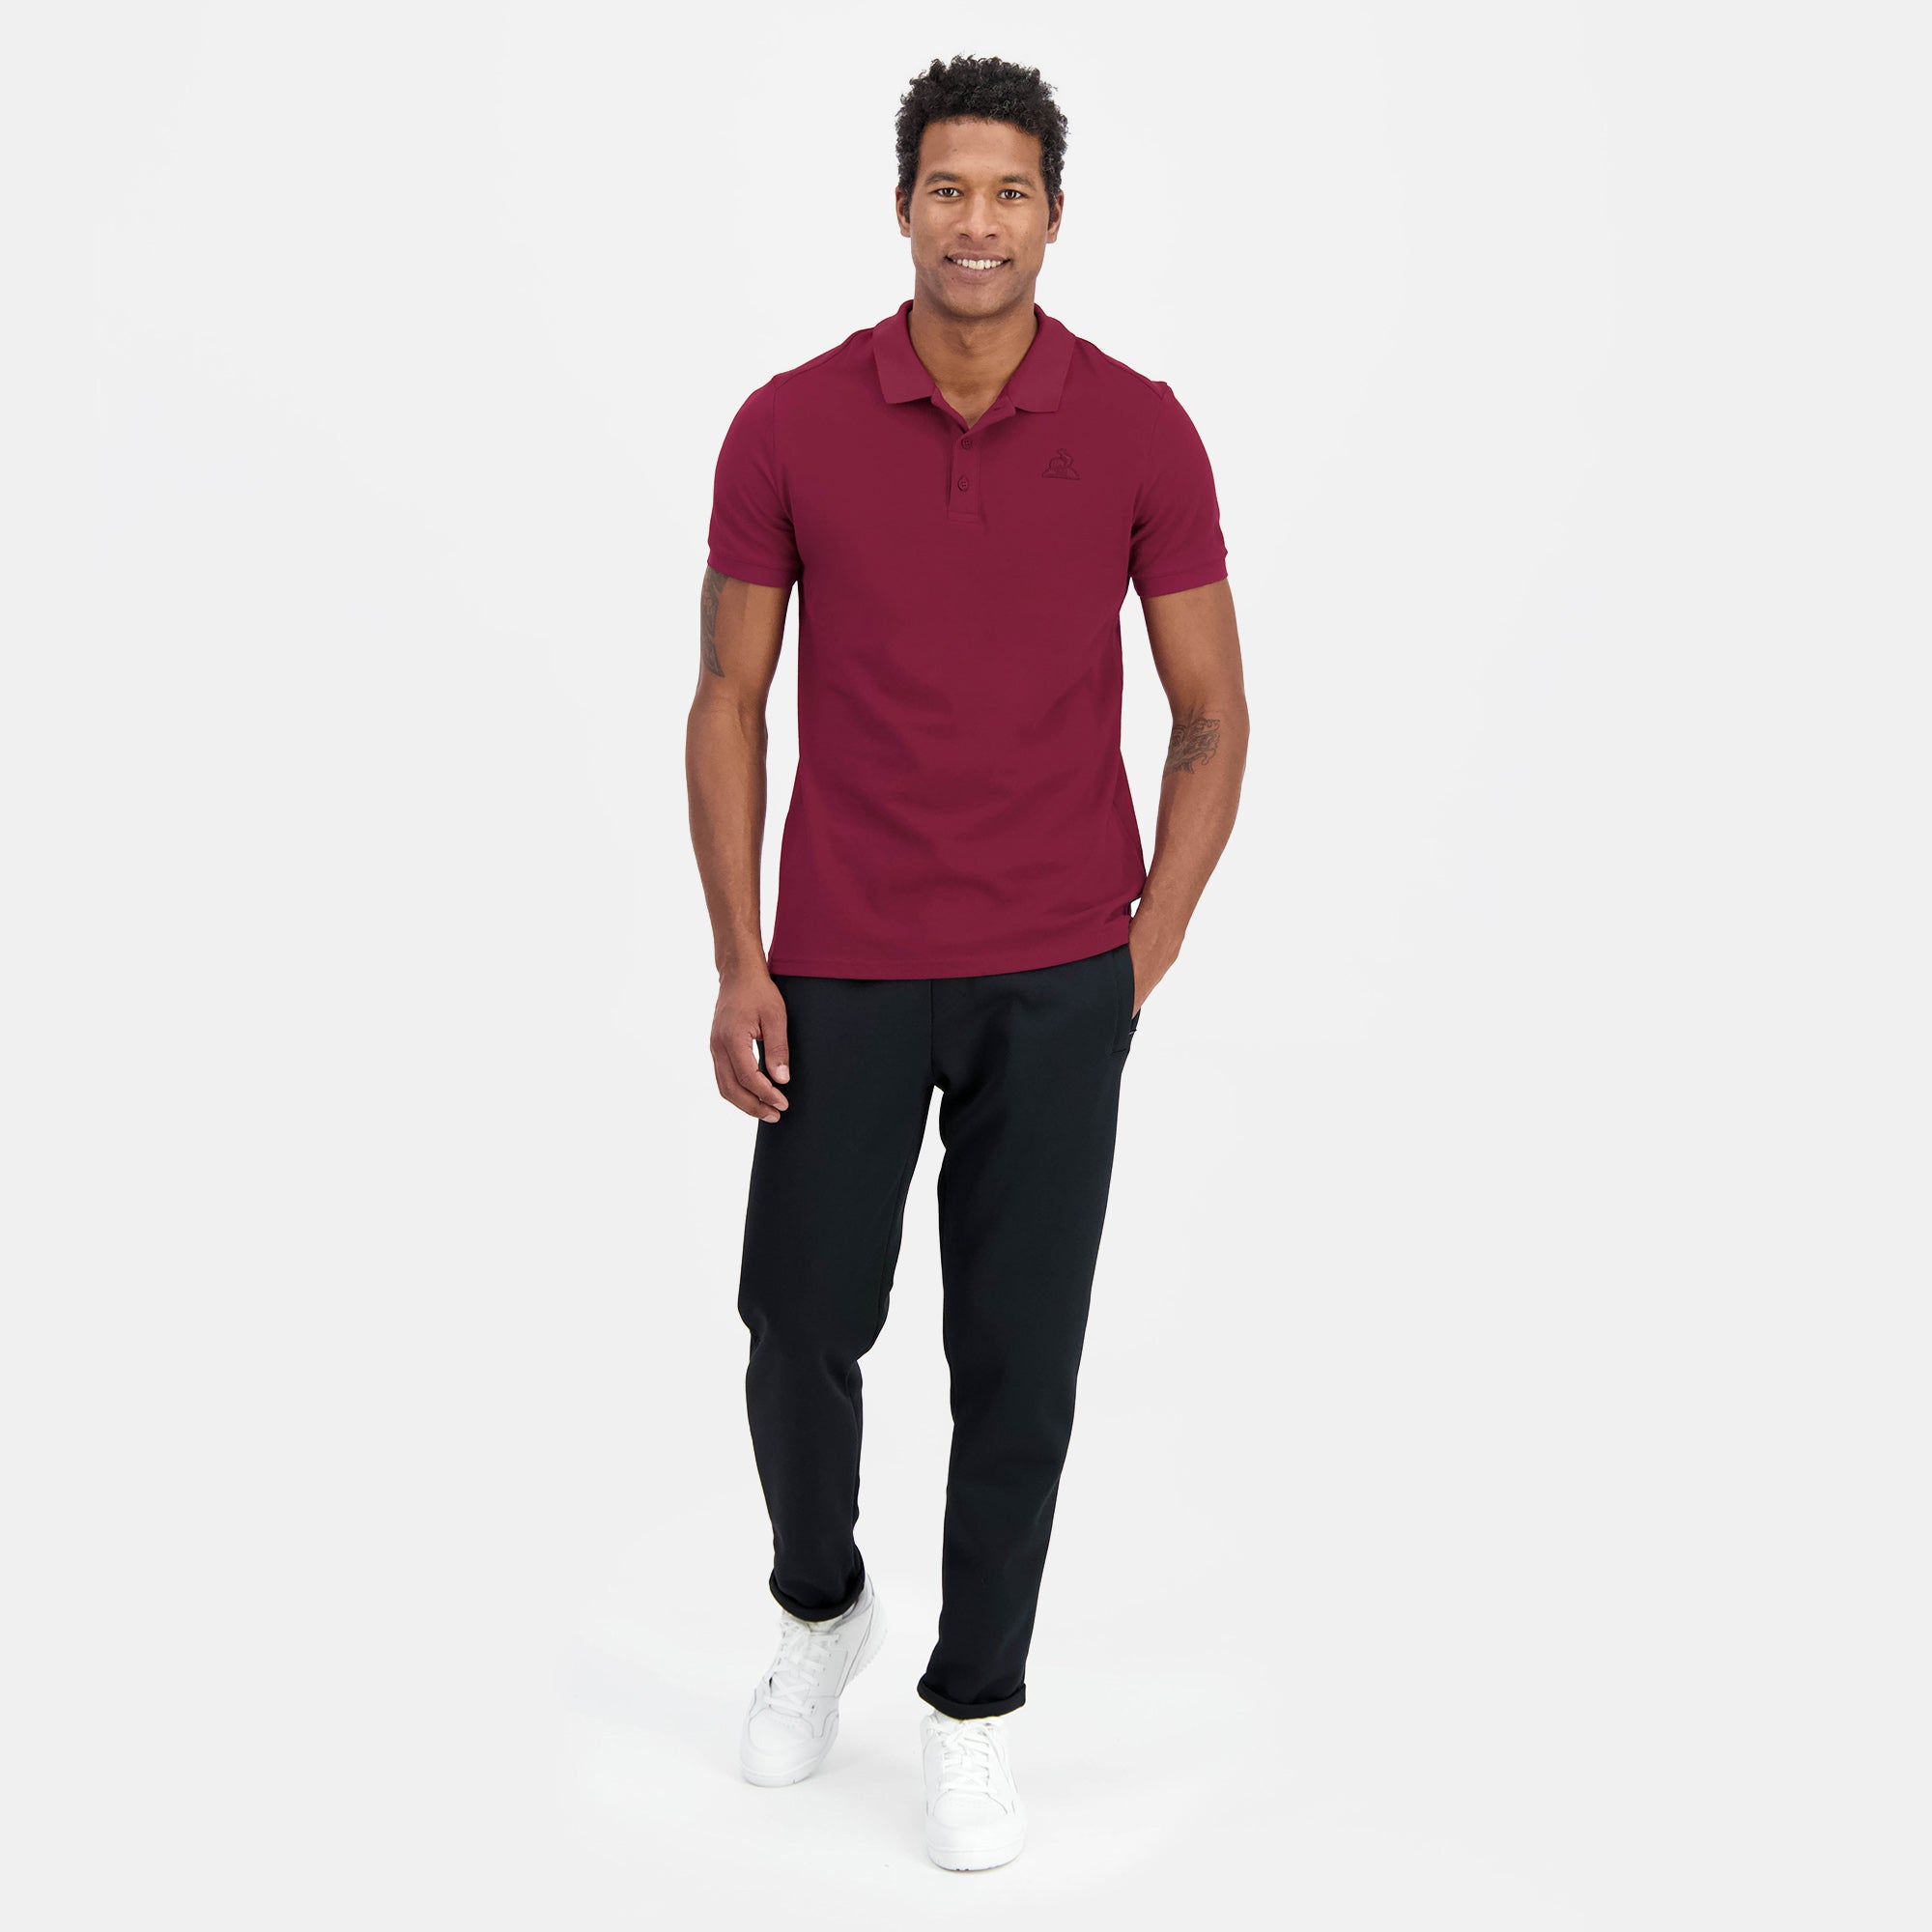 2410411-ESS T/T Polo SS N°1 M rambo red | Polo Homme en jersey piqué coton